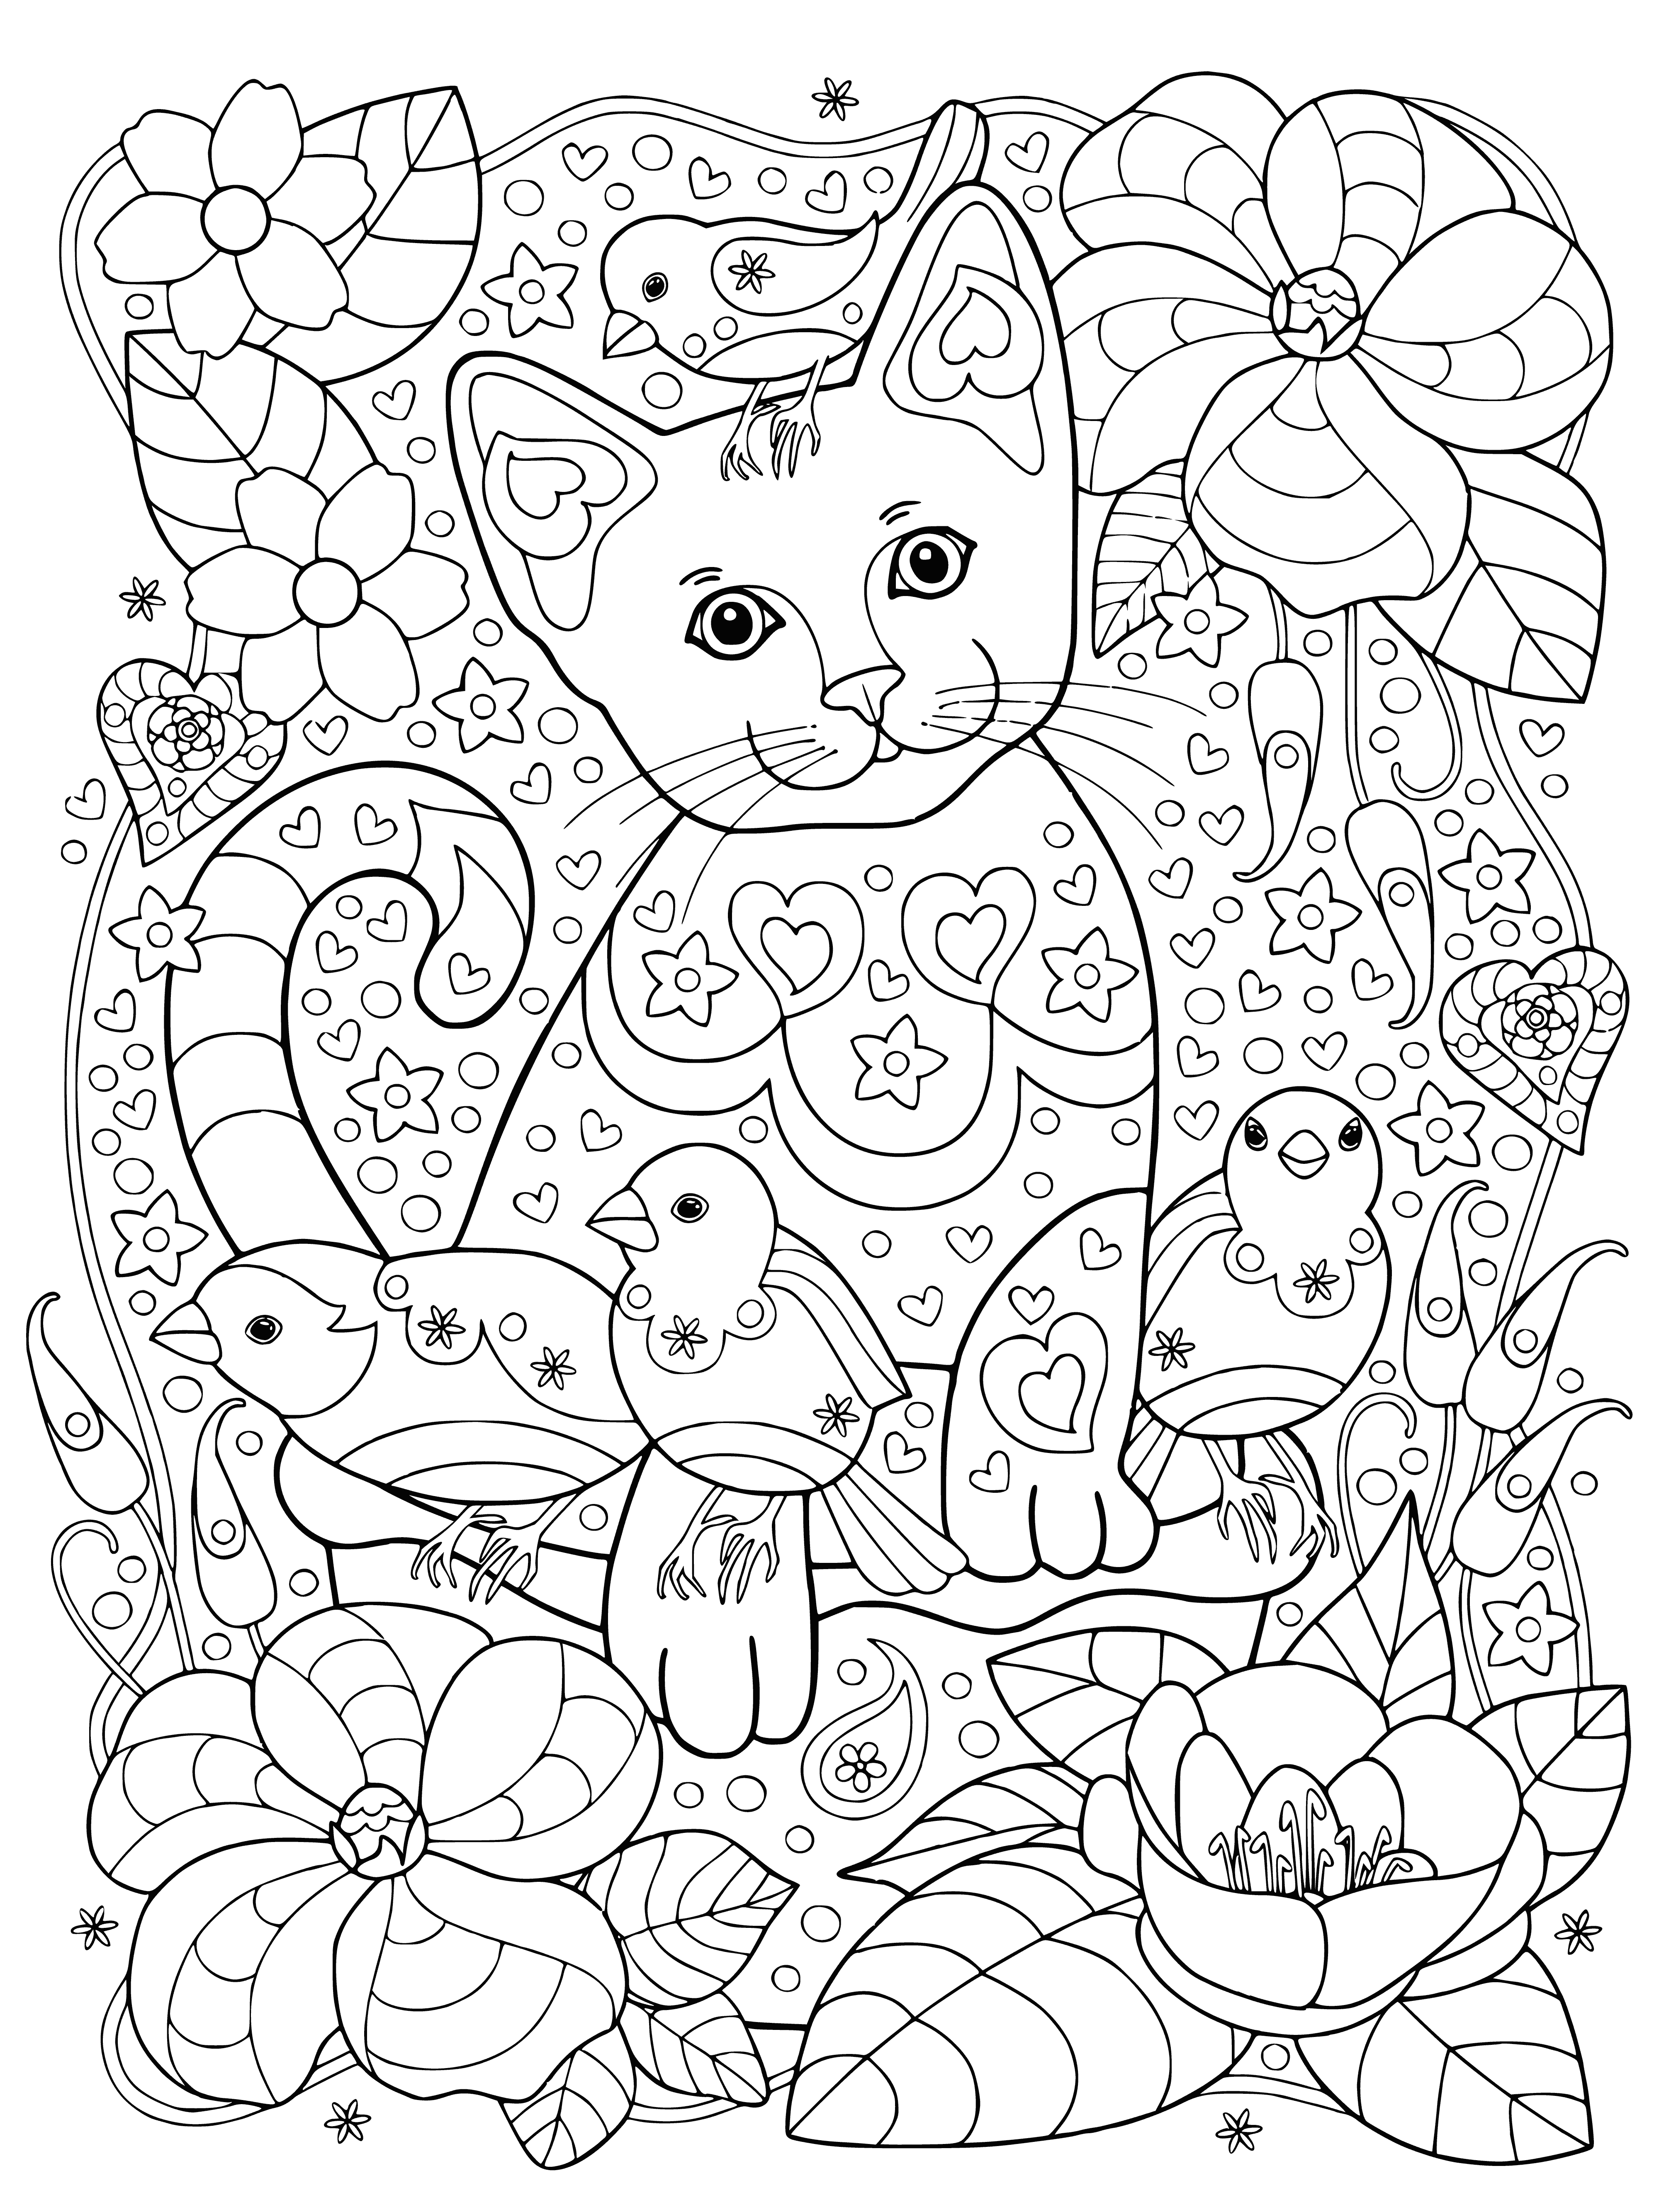 coloring page: Two cats, one black and white, one orange and white, sitting on a fence. Three sparrows nearby.